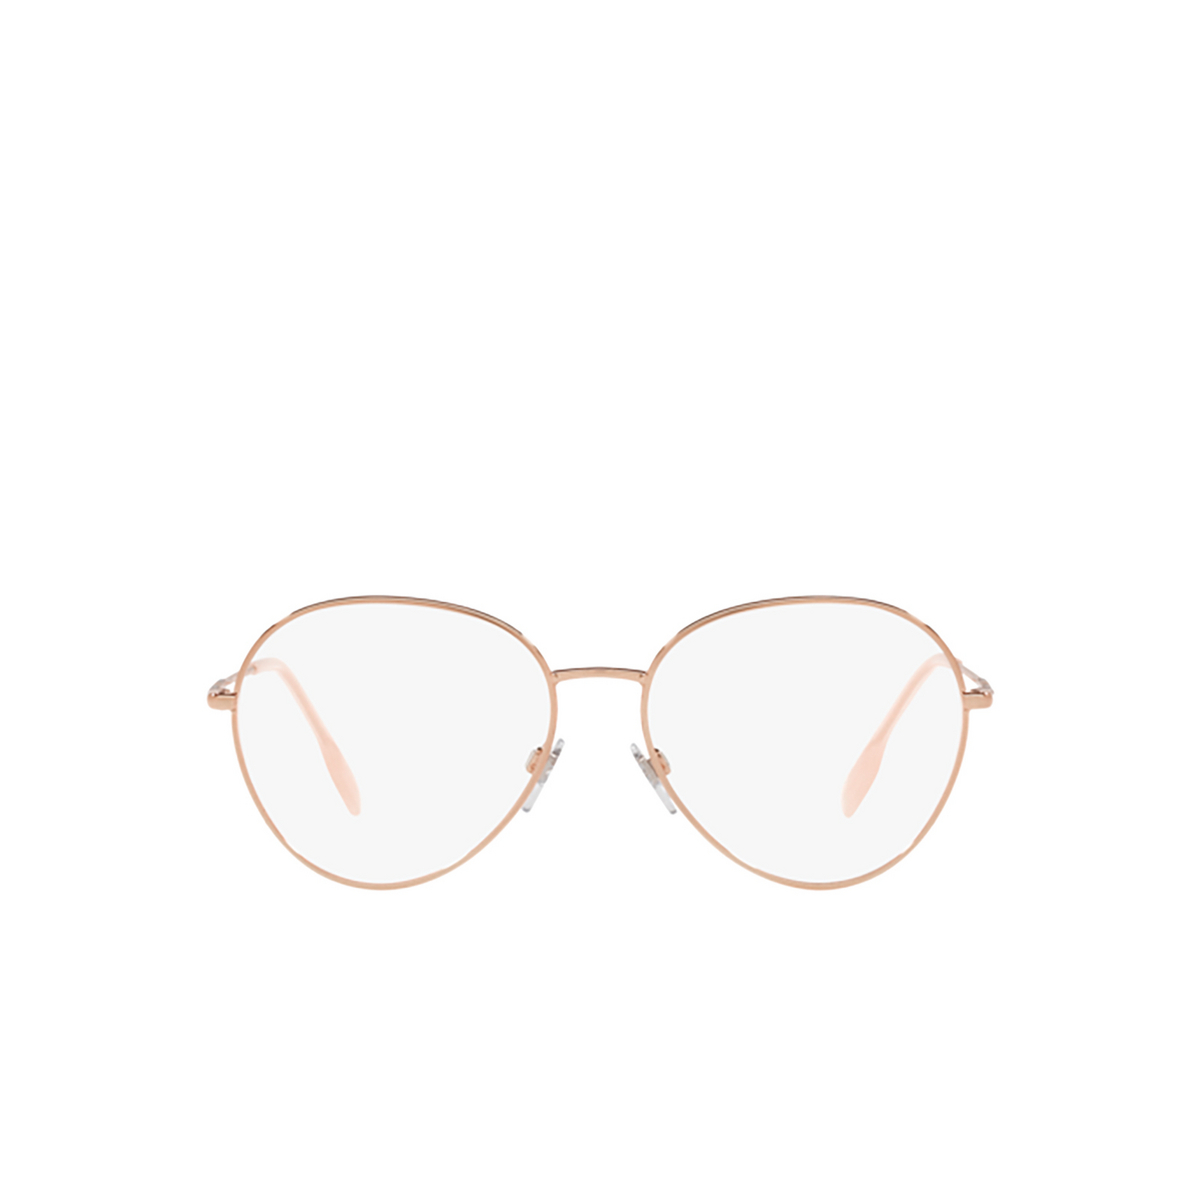 Burberry FELICITY Eyeglasses 1337 Rose Gold - front view